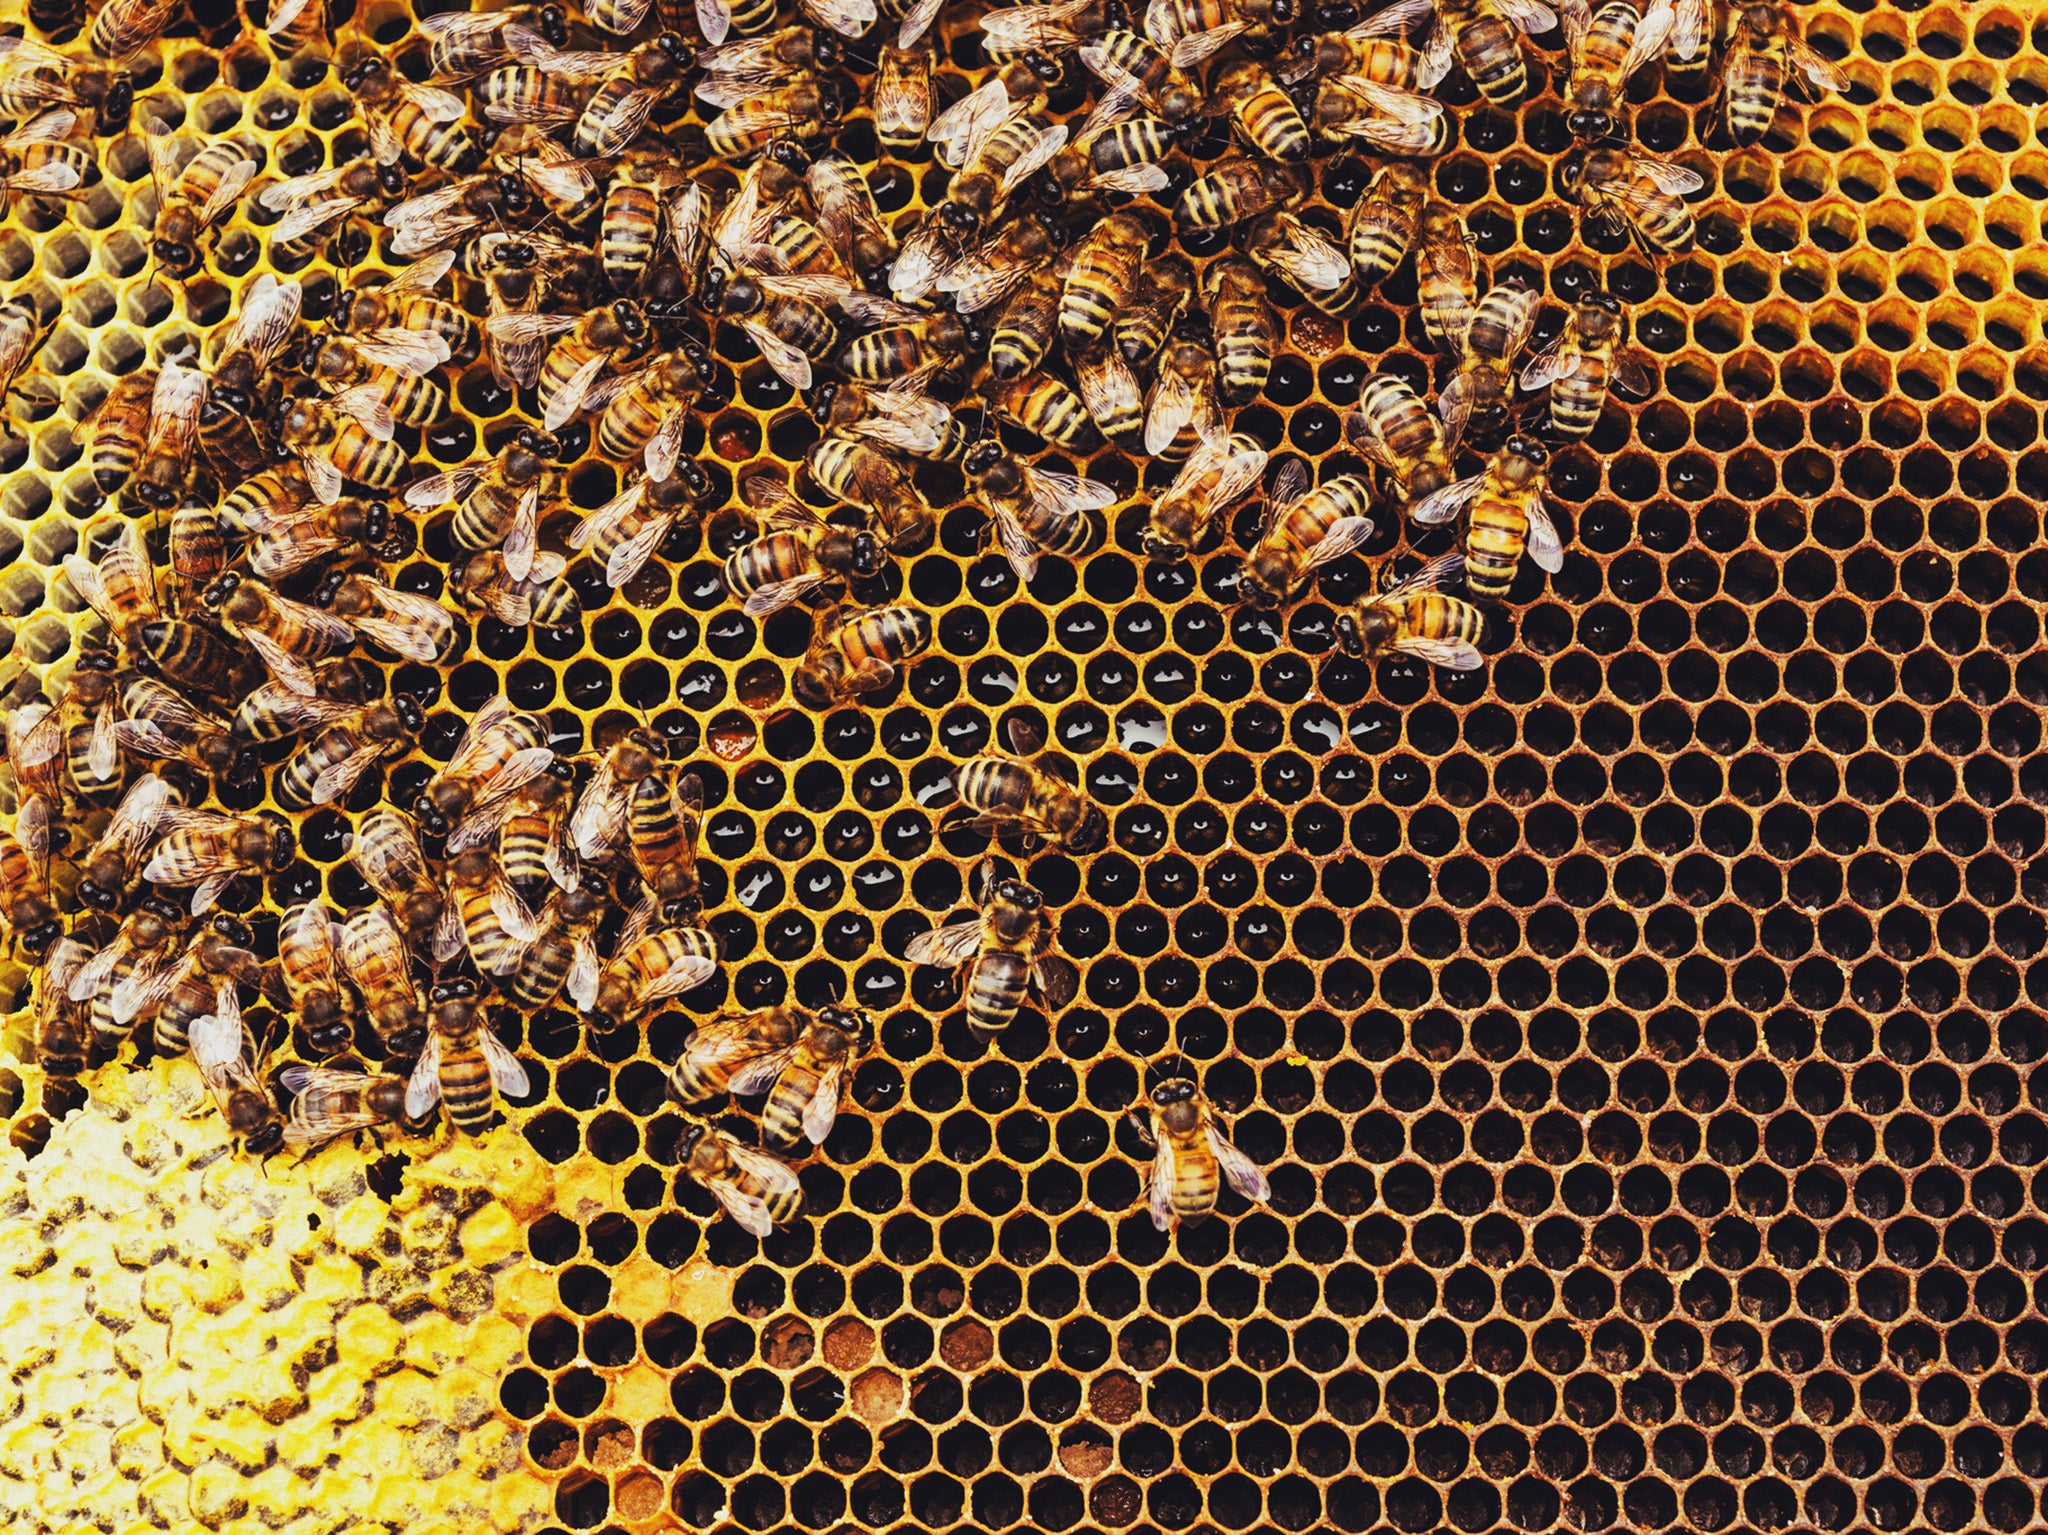 Honey could be a pollution detector